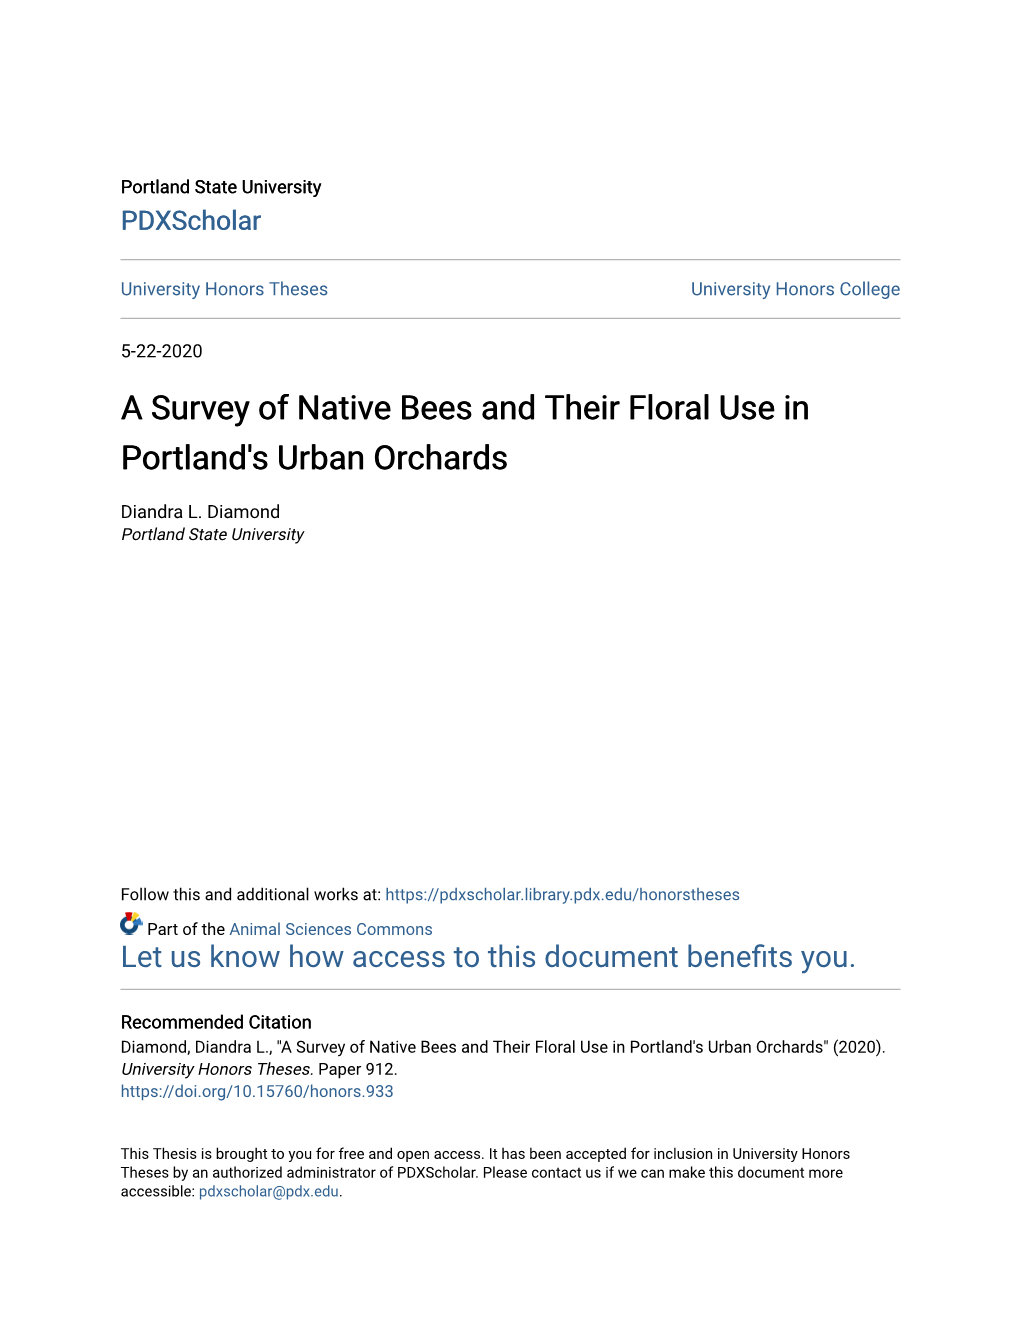 A Survey of Native Bees and Their Floral Use in Portland's Urban Orchards